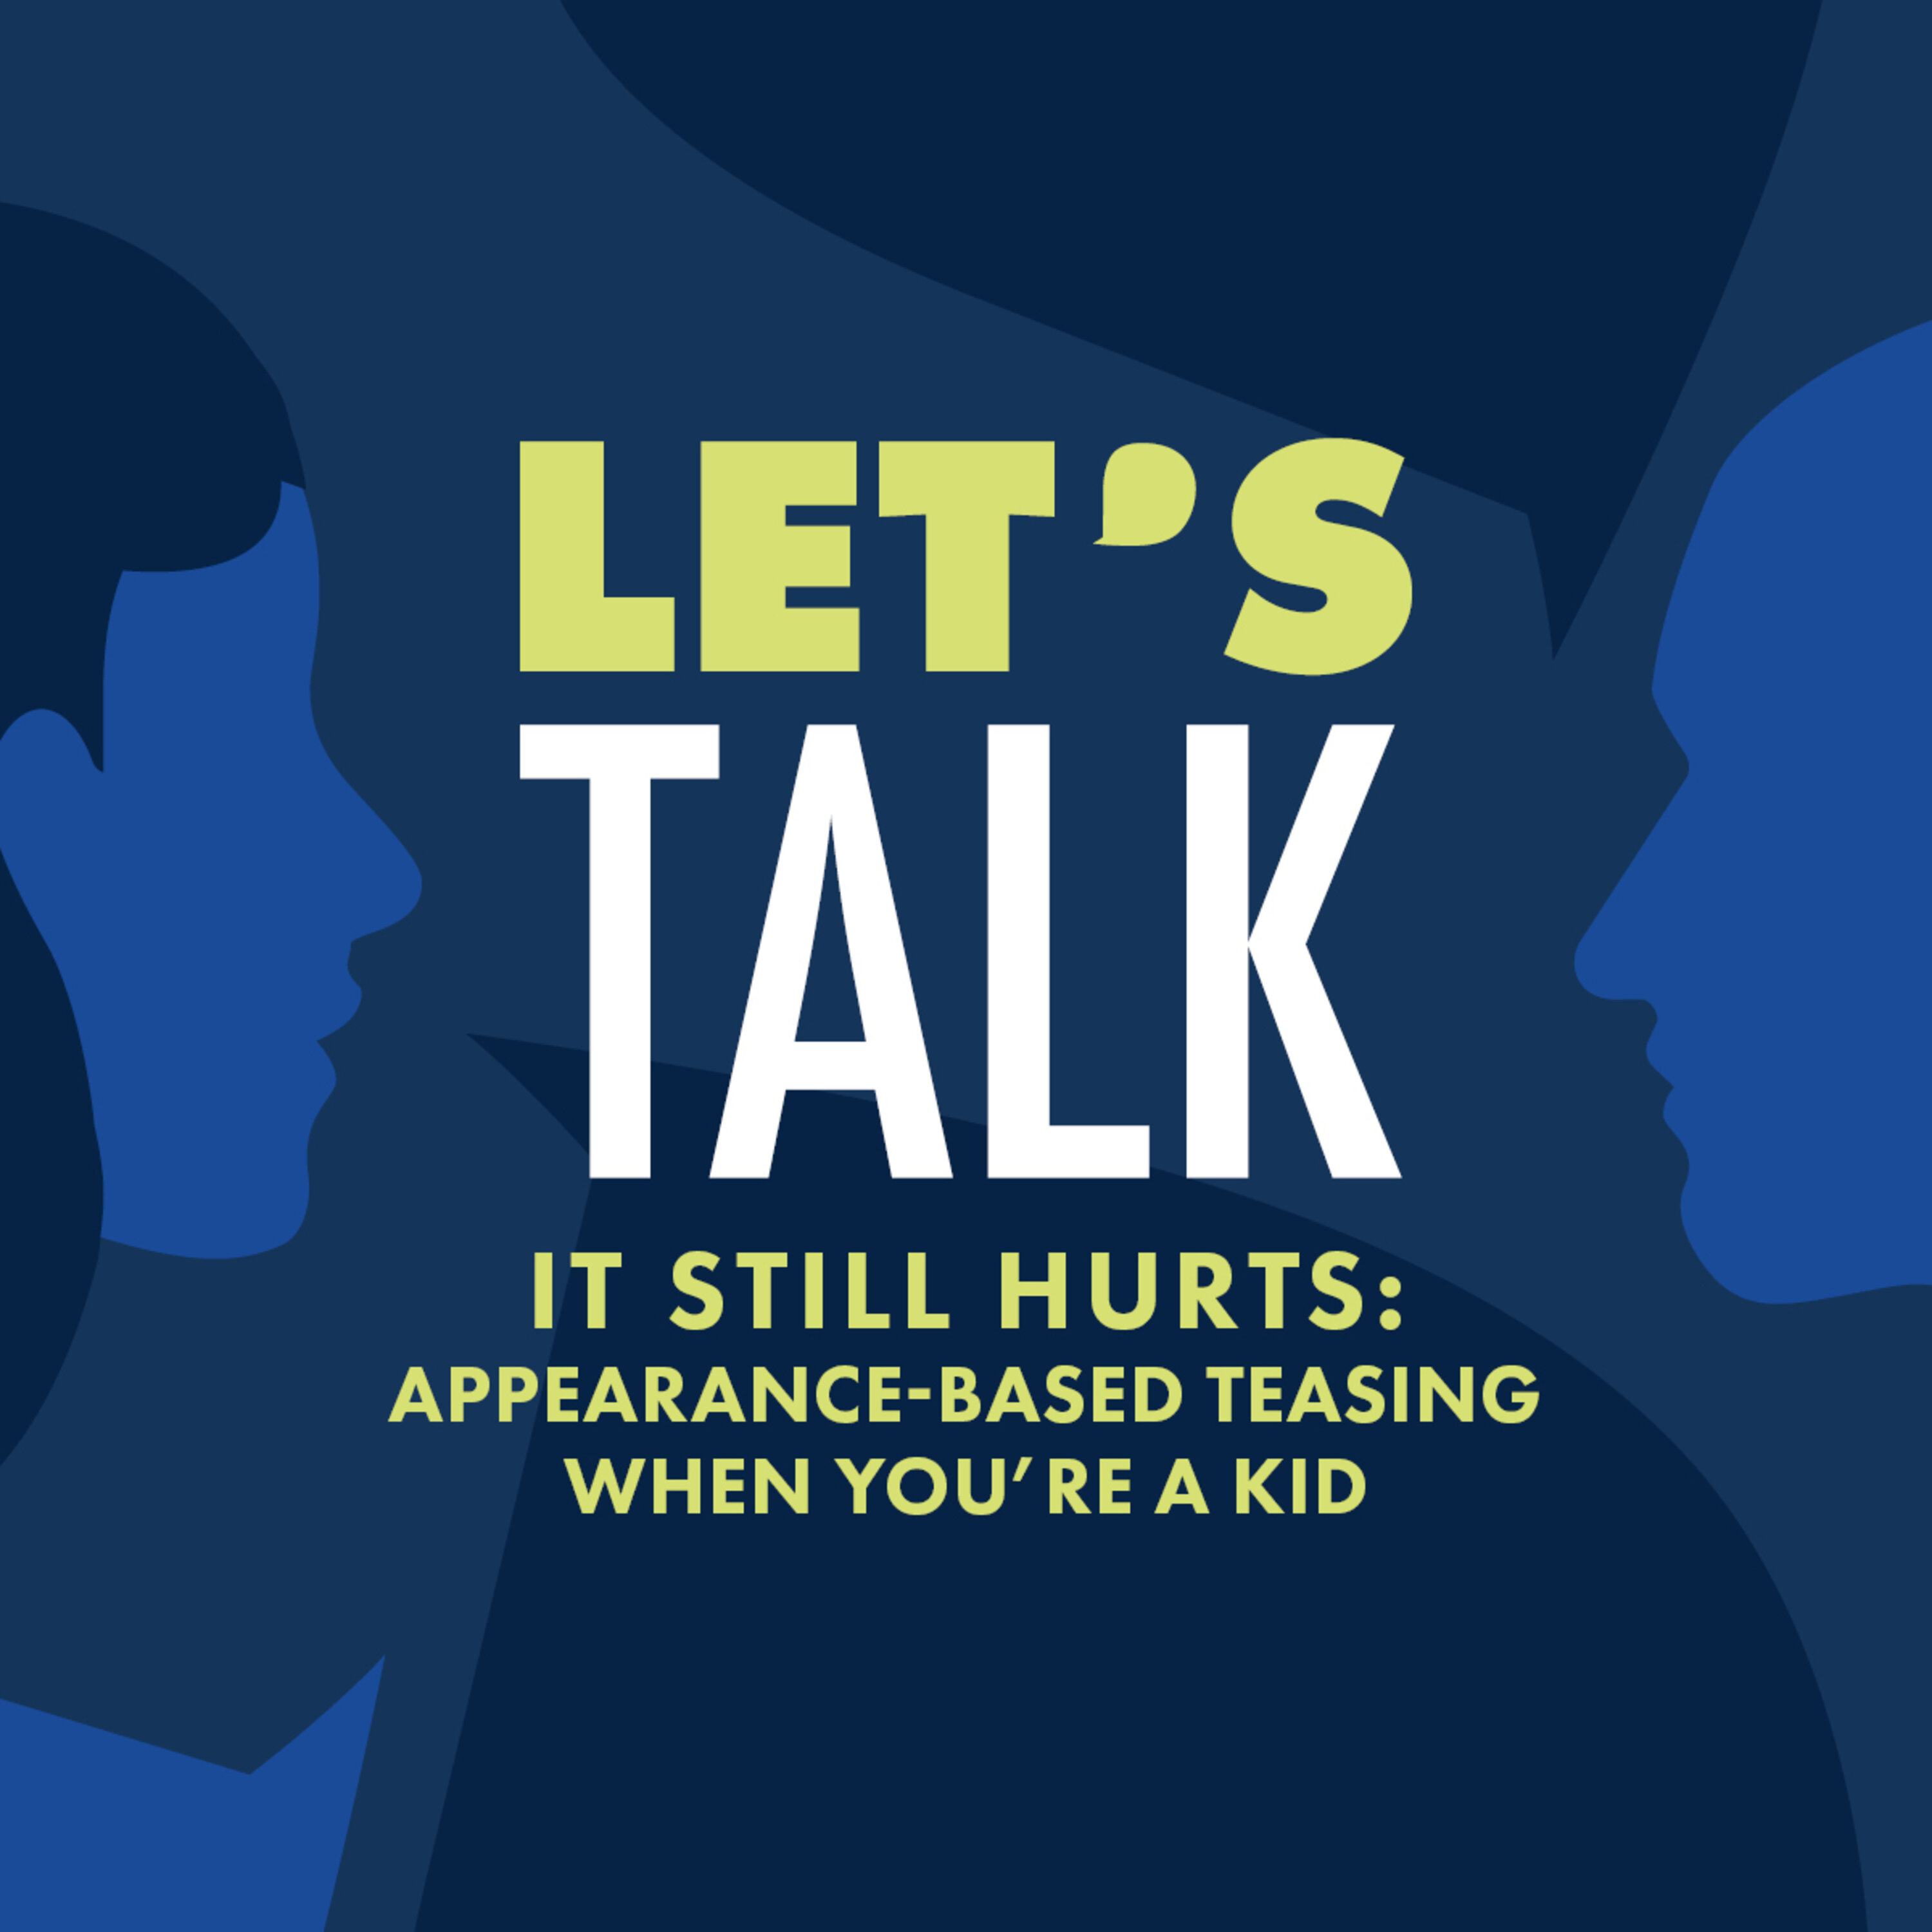 It still hurts: Appearance-based teasing when you're a kid